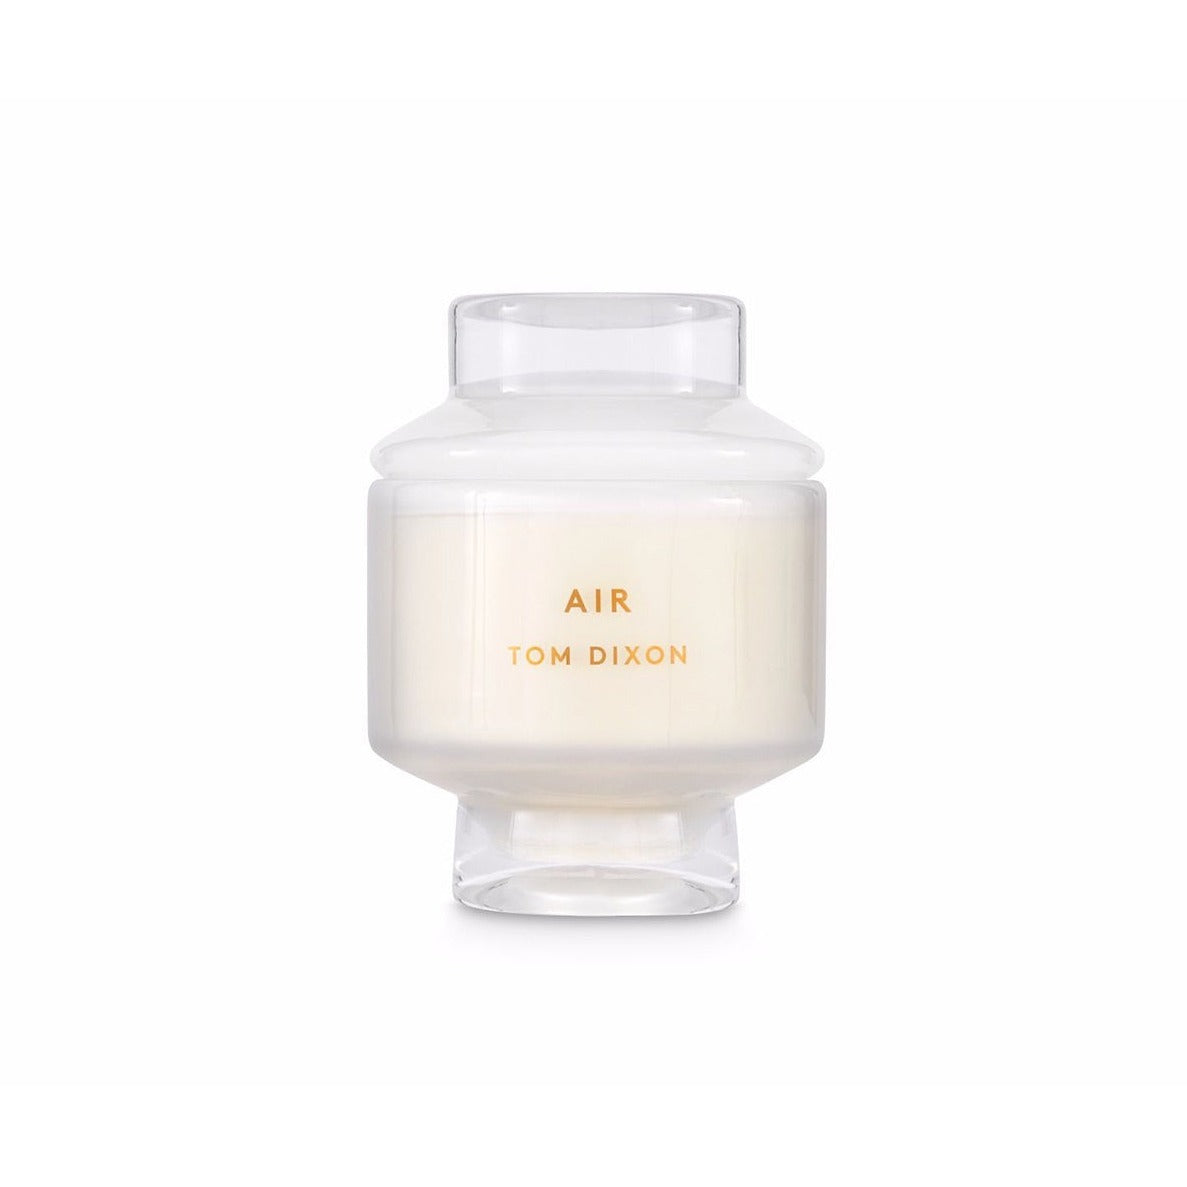 TOM DIXON | Elements Candle Air - Large